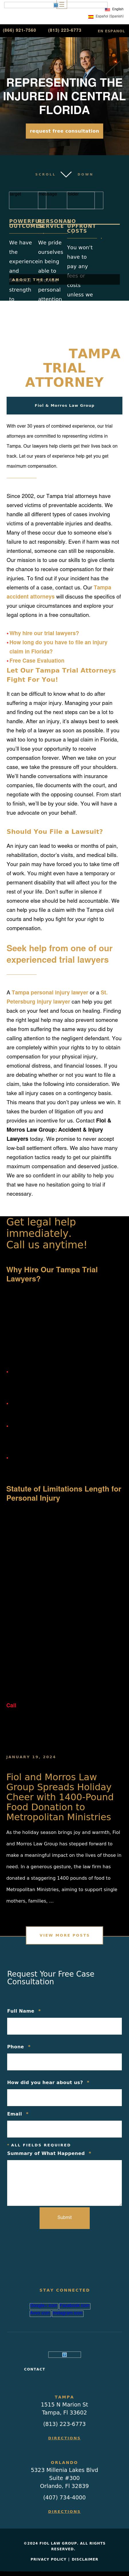 Fiol Law Group - Tampa FL Lawyers